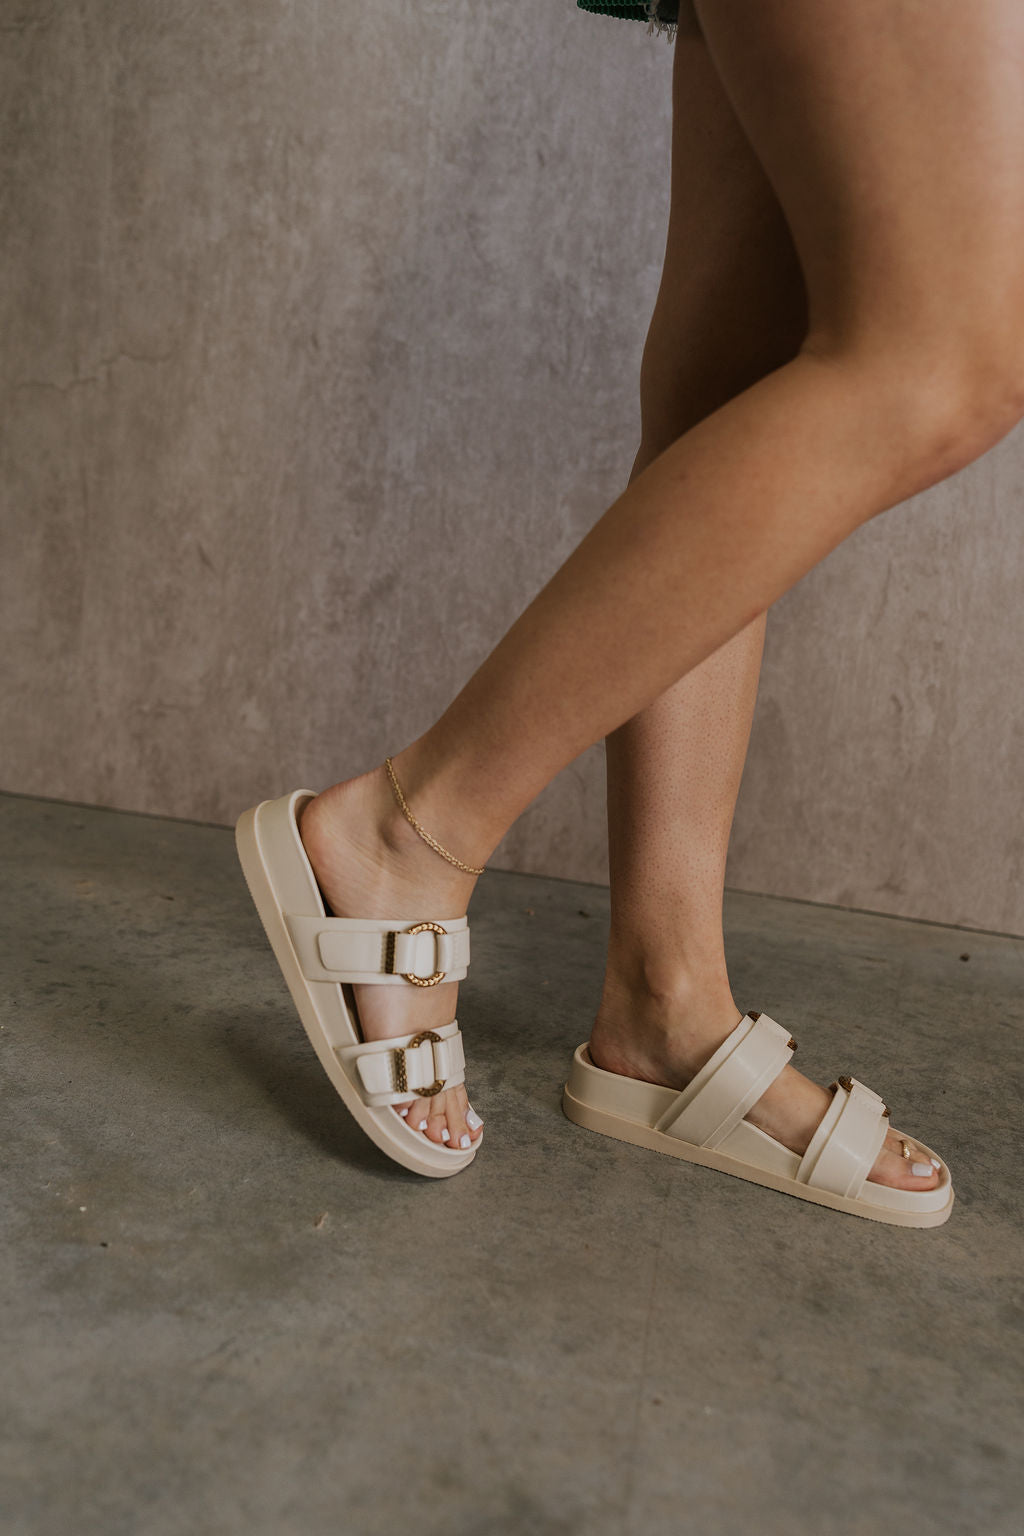 Right side view of female model wearing the Soya Sandal in White Leather which features white leather fabric, chunky sole, gold hammered metallic ring accents and slip-on style